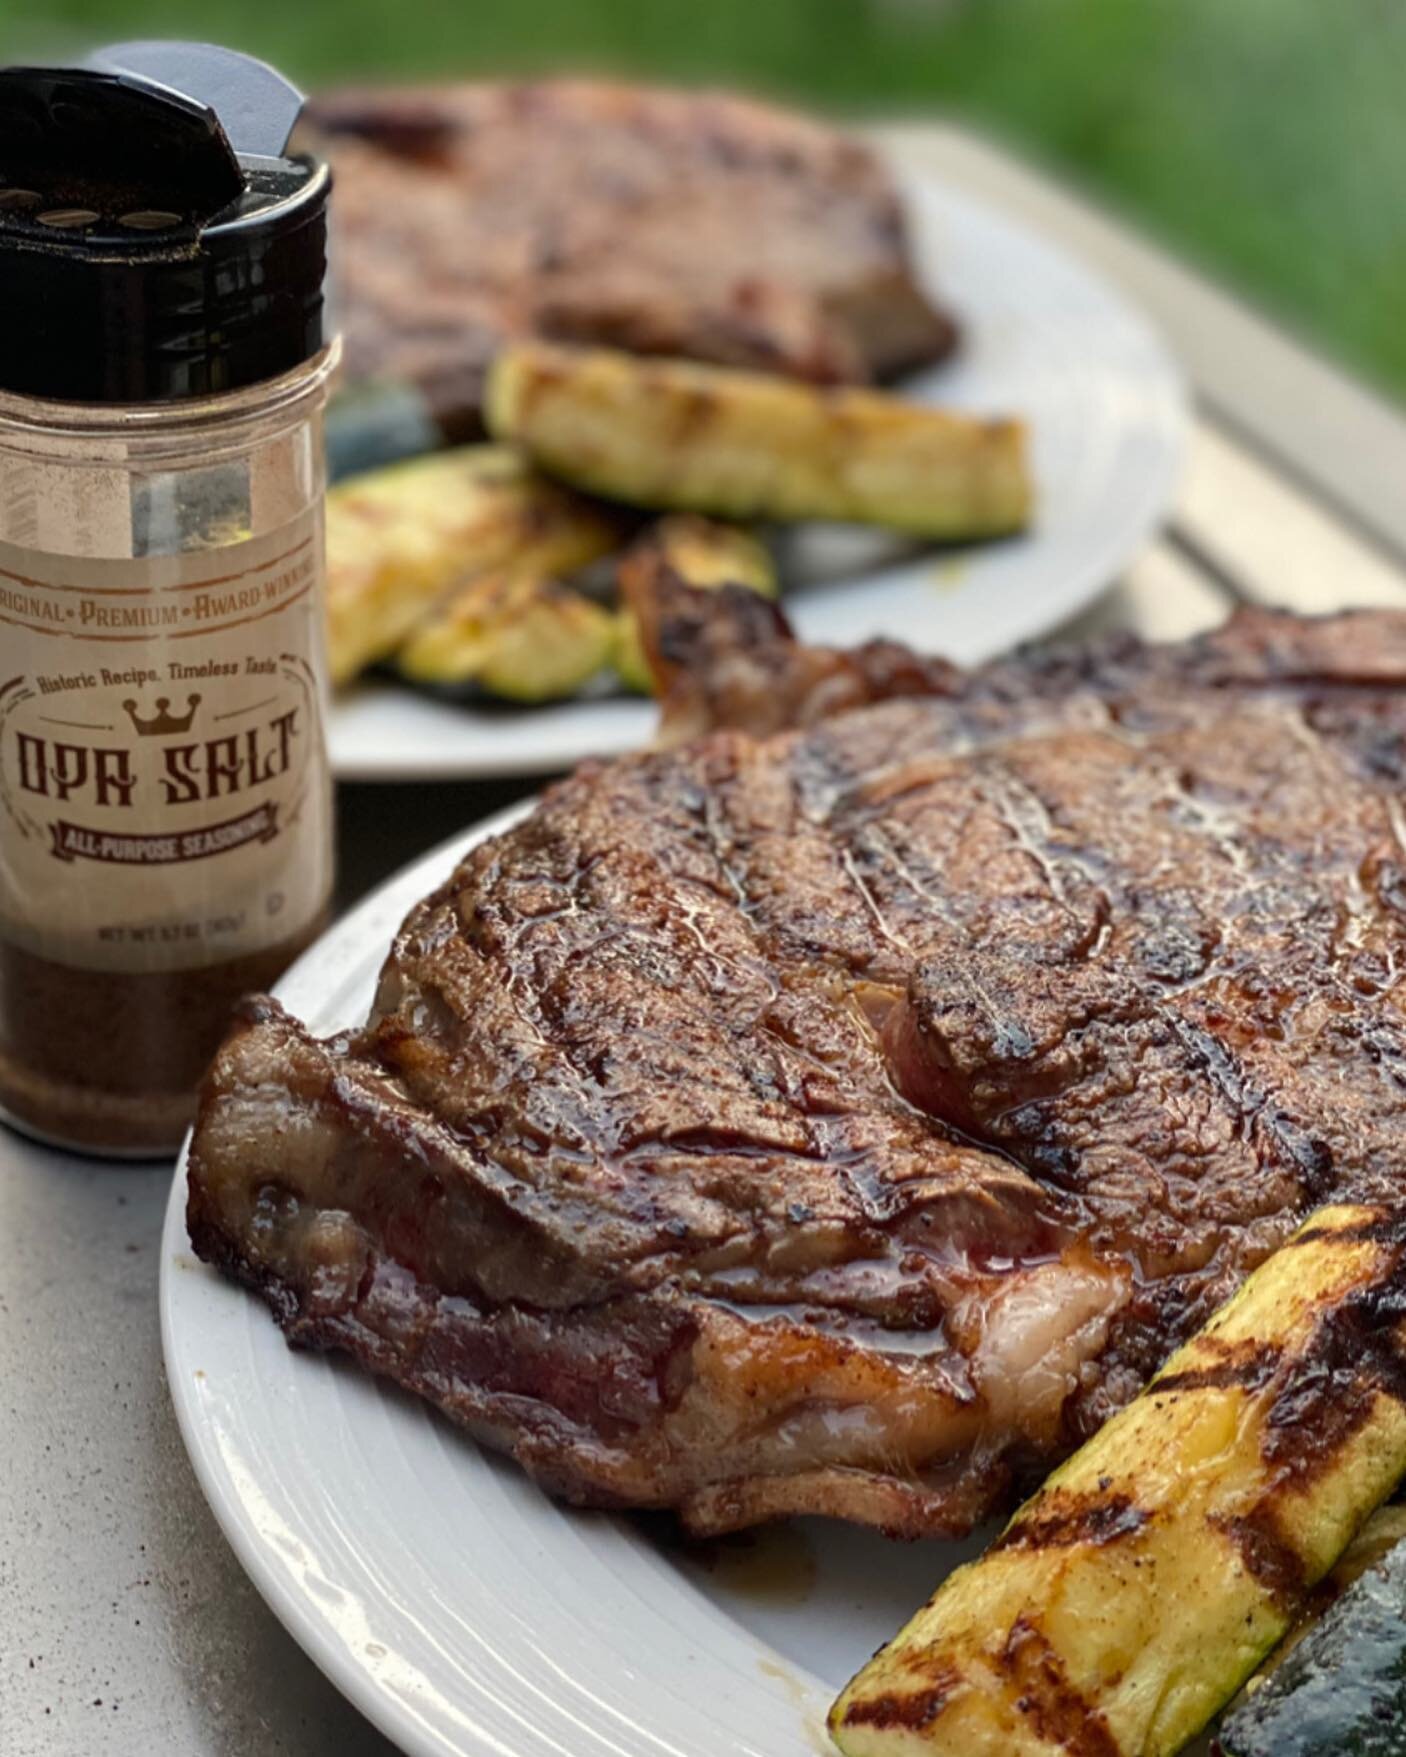 Father&rsquo;s Day is coming up, and to celebrate, Opa Salt is now just $5.50 on Amazon! 

Make sure to grab a bottle or two for your favorite #grillmaster ! This sale won&rsquo;t last long! 

Link in bio to shop

#opasalt #amazonfinds #fathersday #g